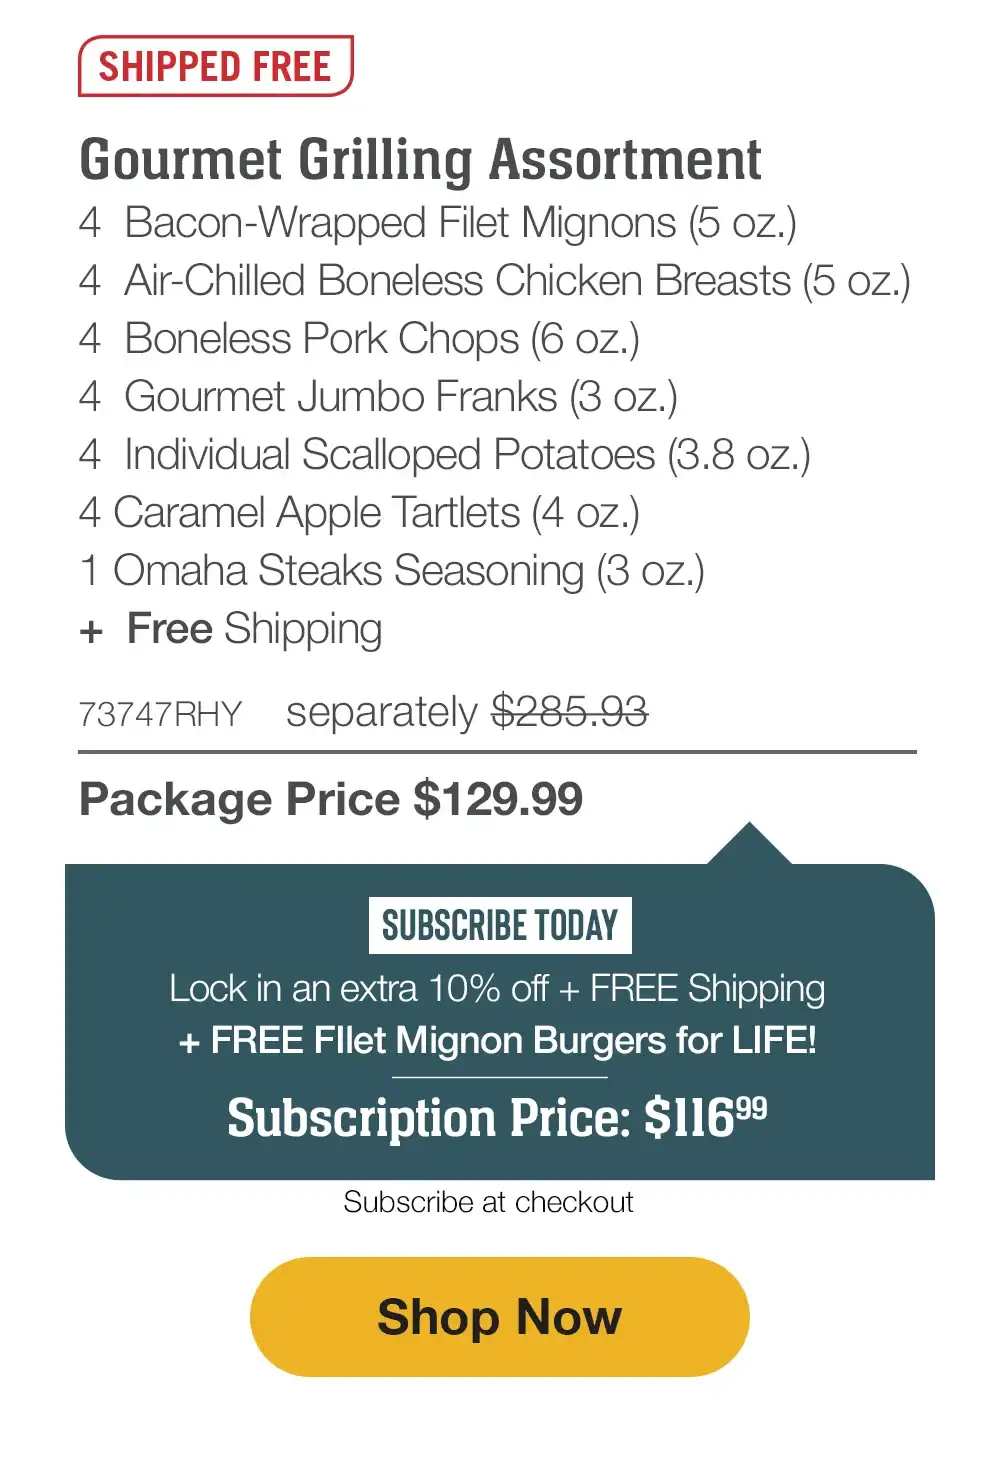 SHIPPED FREE | Gourmet Grilling Assortment - 4 Butcher's Cut Top Sirloins (5 oz.) - 4 Air-Chilled Boneless Chicken Breasts (5 oz.) - 4 Boneless Pork Chops (6 oz.) - 4 Gourmet Jumbo Franks (3 oz.) - 4 Omaha Steaks Burgers (6 oz.) - 4 Individual Scalloped Potatoes (3.8 oz.) - 4 Caramel Apple Tartlets (4 oz.) - 1 Omaha Steaks Seasoning (3 oz.) + Free Shipping - 75593RHY separately \\$290.92 | Package Price \\$129.99 | SUBSCRIBE TODAY - Lock in an extra 10% off + FREE Shipping + FREE Filet Mignon Burgers for LIFE! Subscription Price: \\$116.99 | Subscribe at checkout || Shop Now